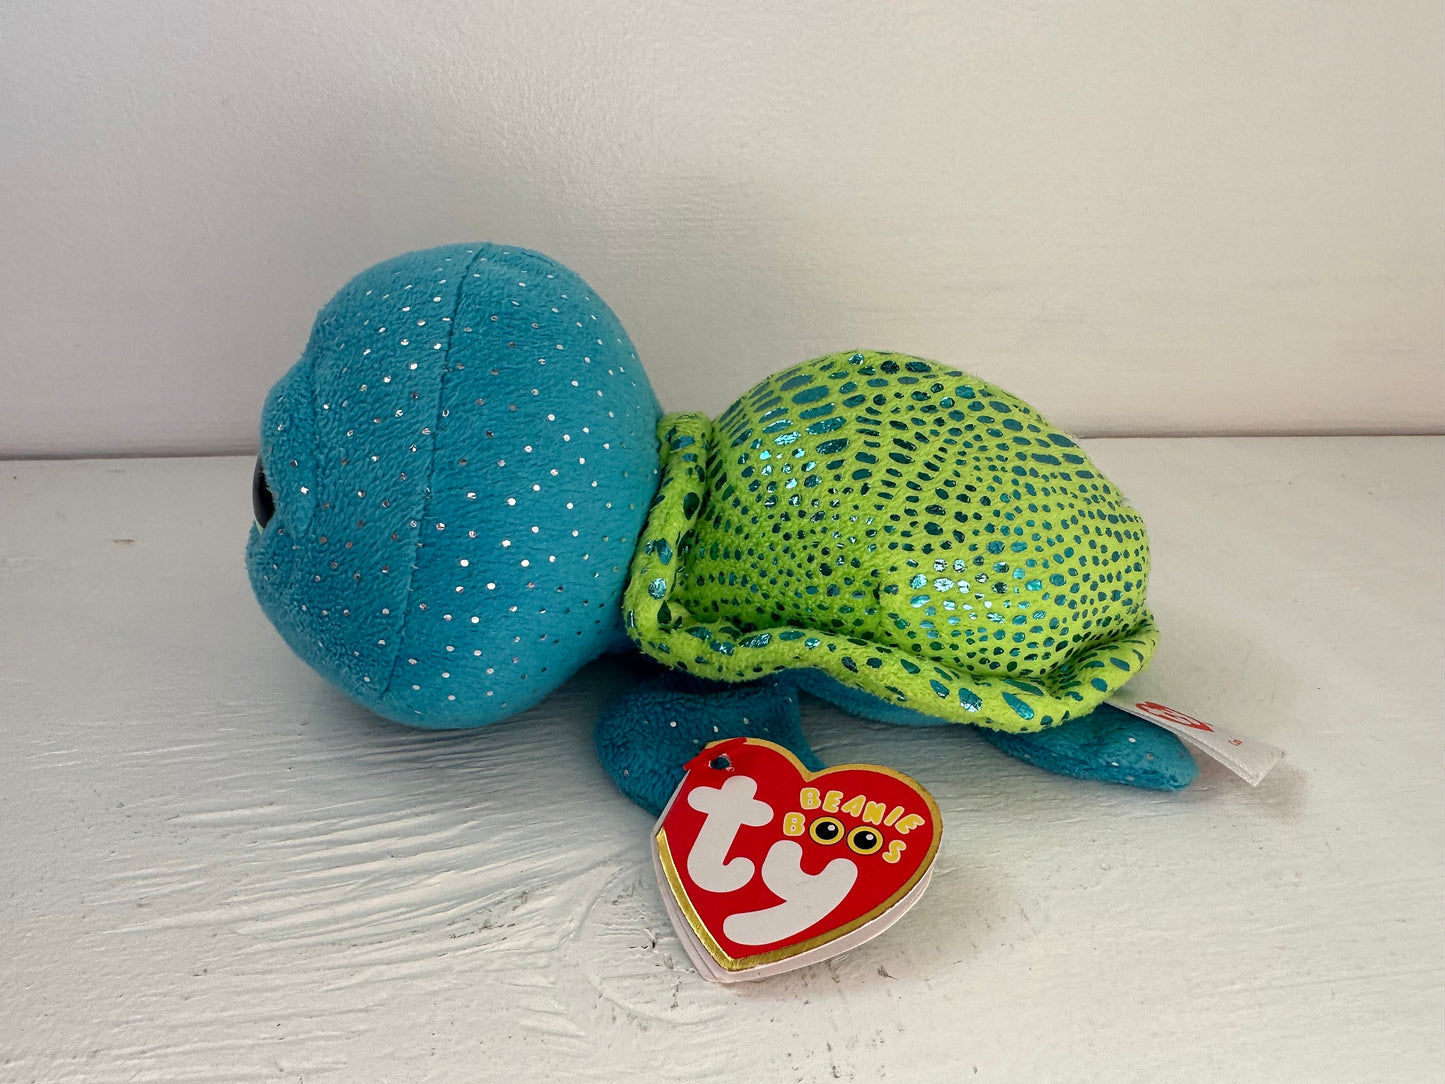 Ty Beanie Boo “Cara” the Blue and Green Turtle - Sea World Exclusive Rare! (6 inch)